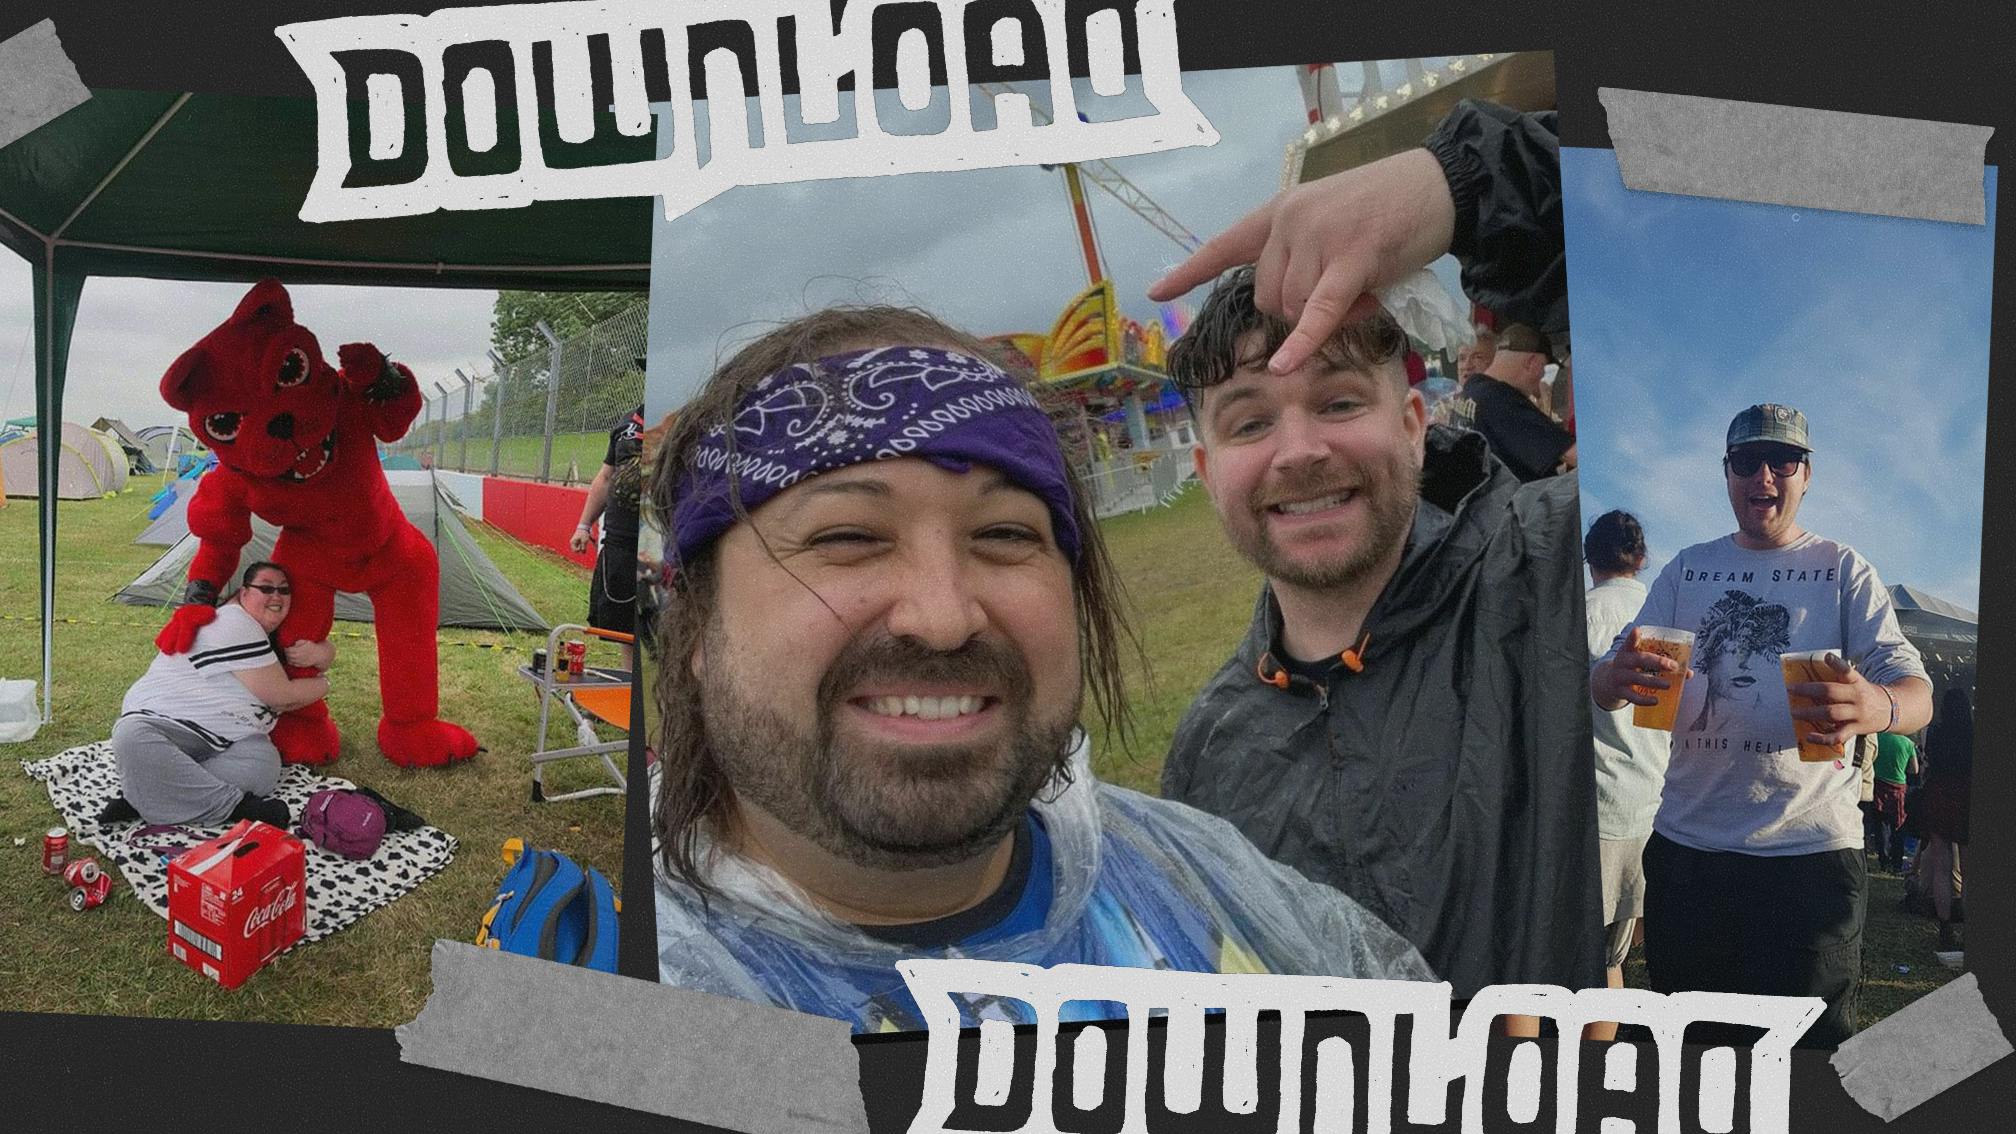 “It’s my annual retreat away from the nonsense of the world”: Meet the Download superfans